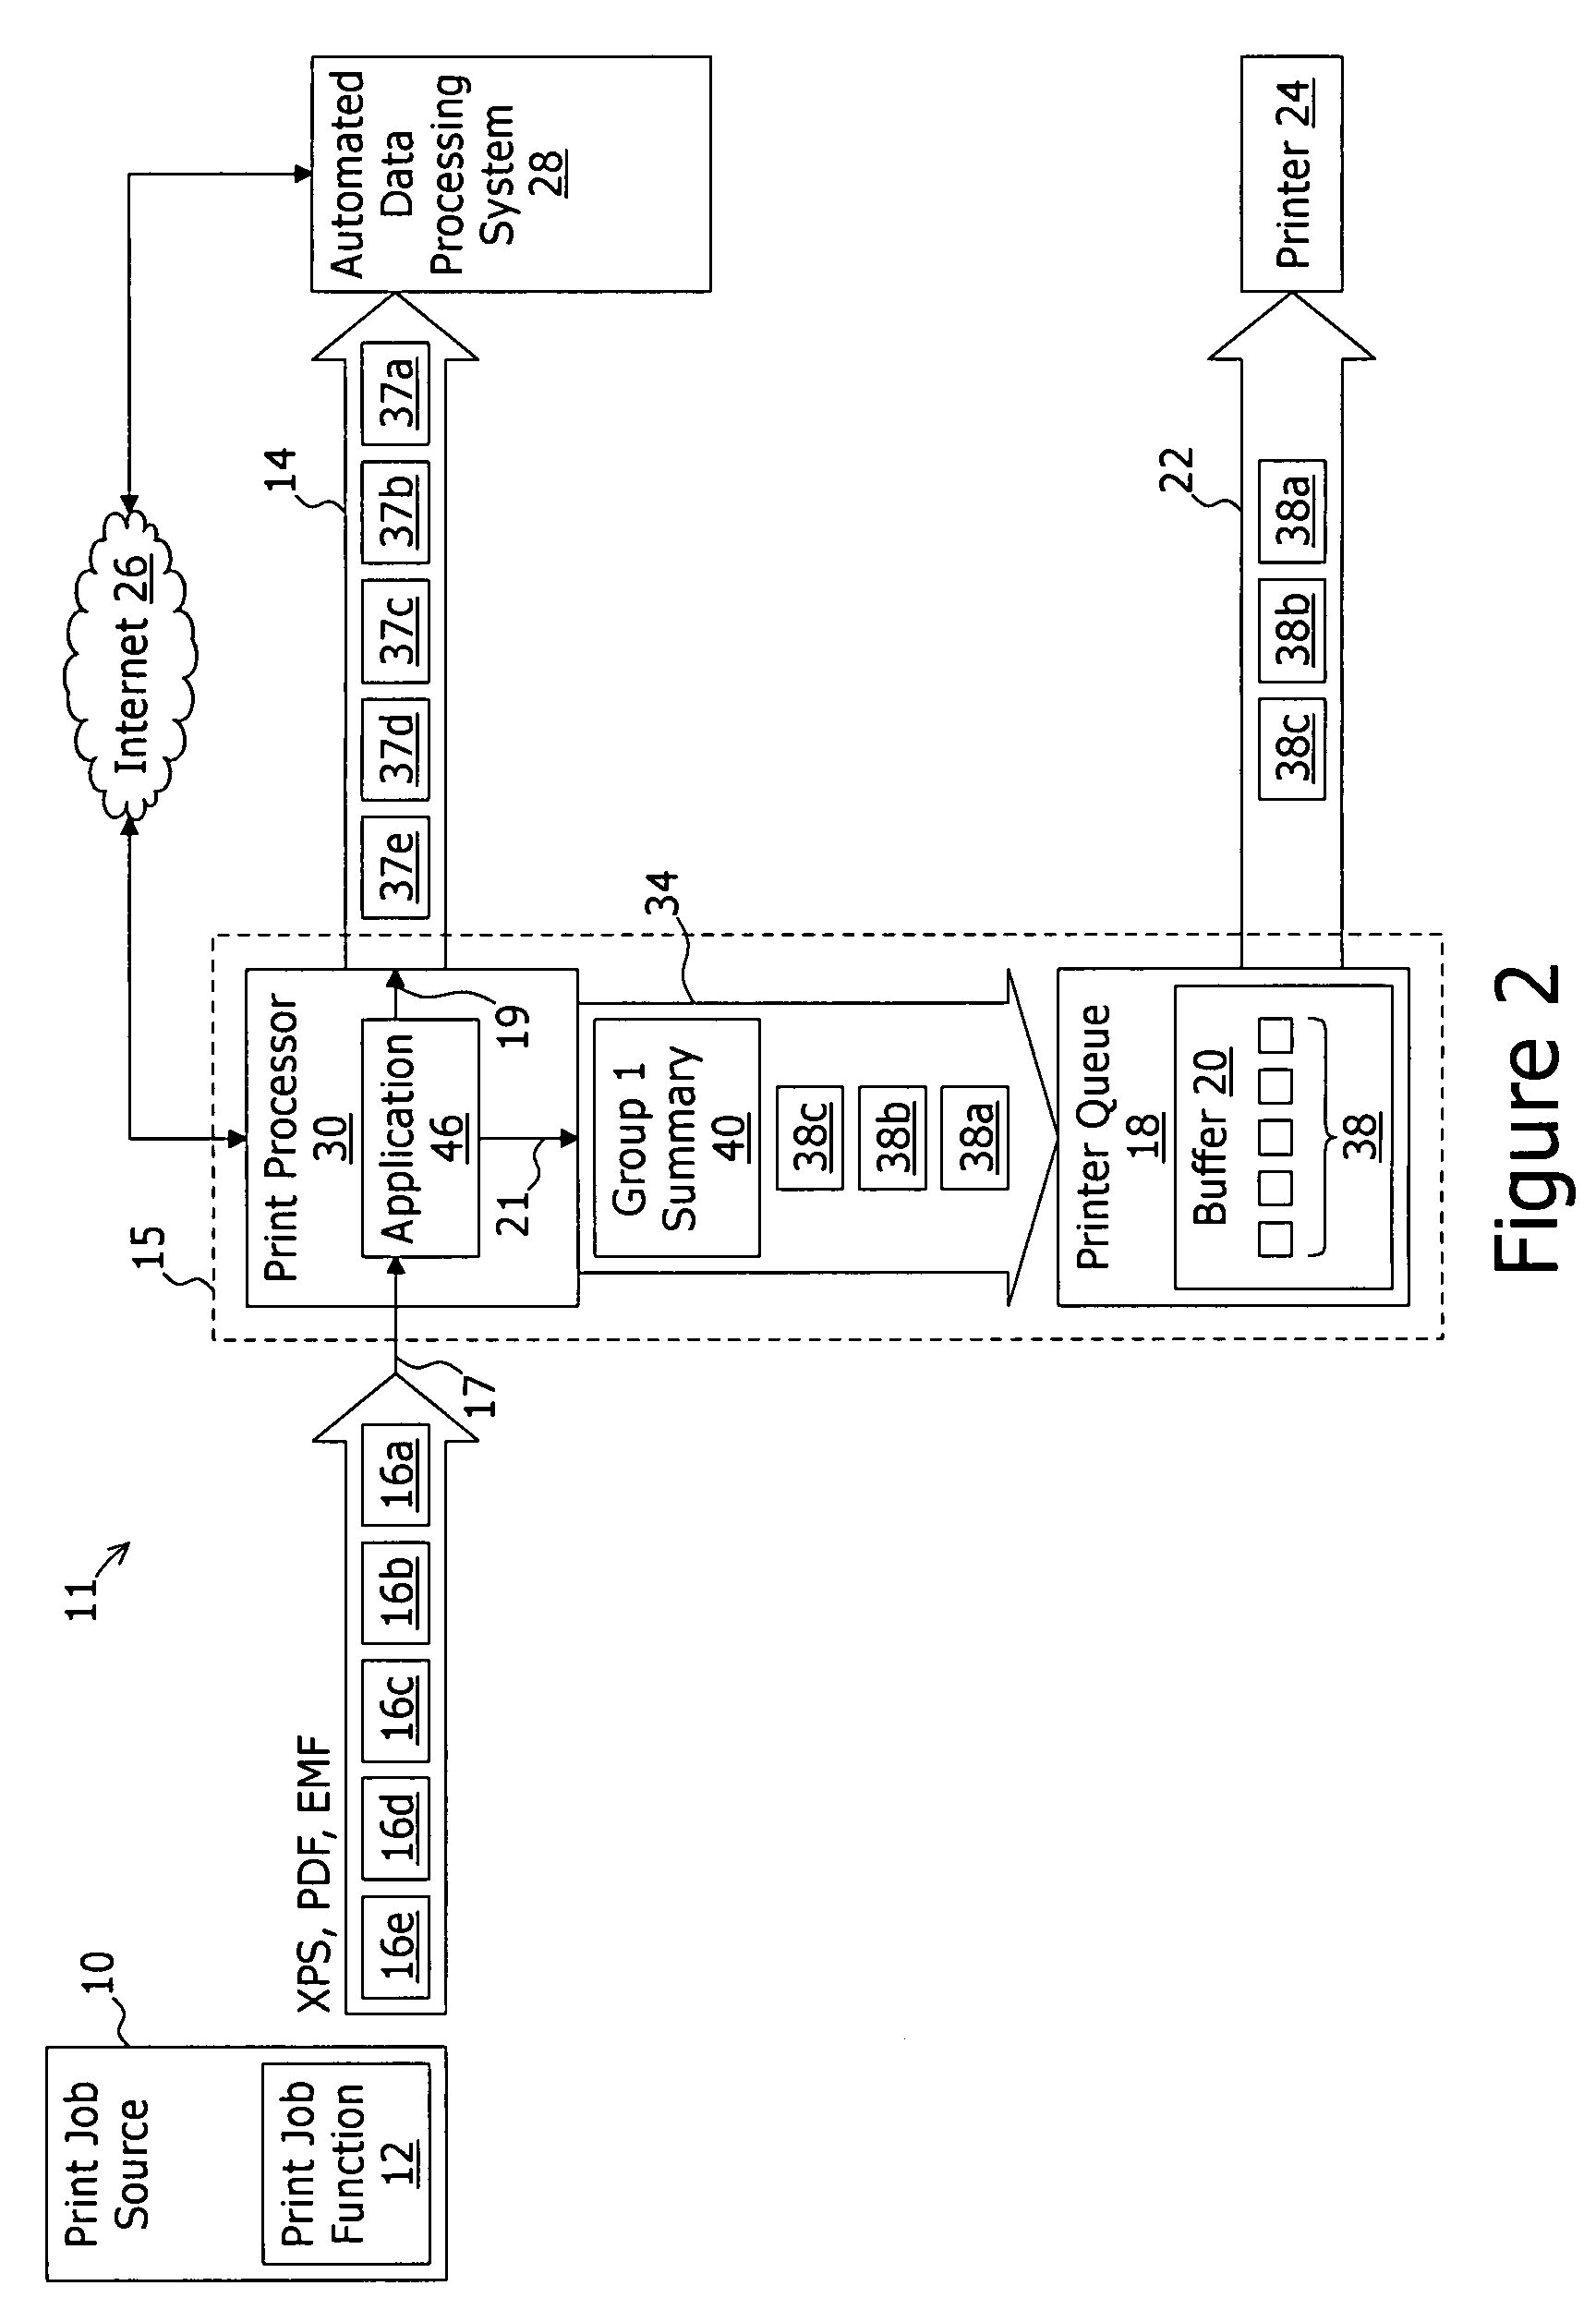 System and method for transferring a portion of a document print sequence output by a print job source to an automated data processing system